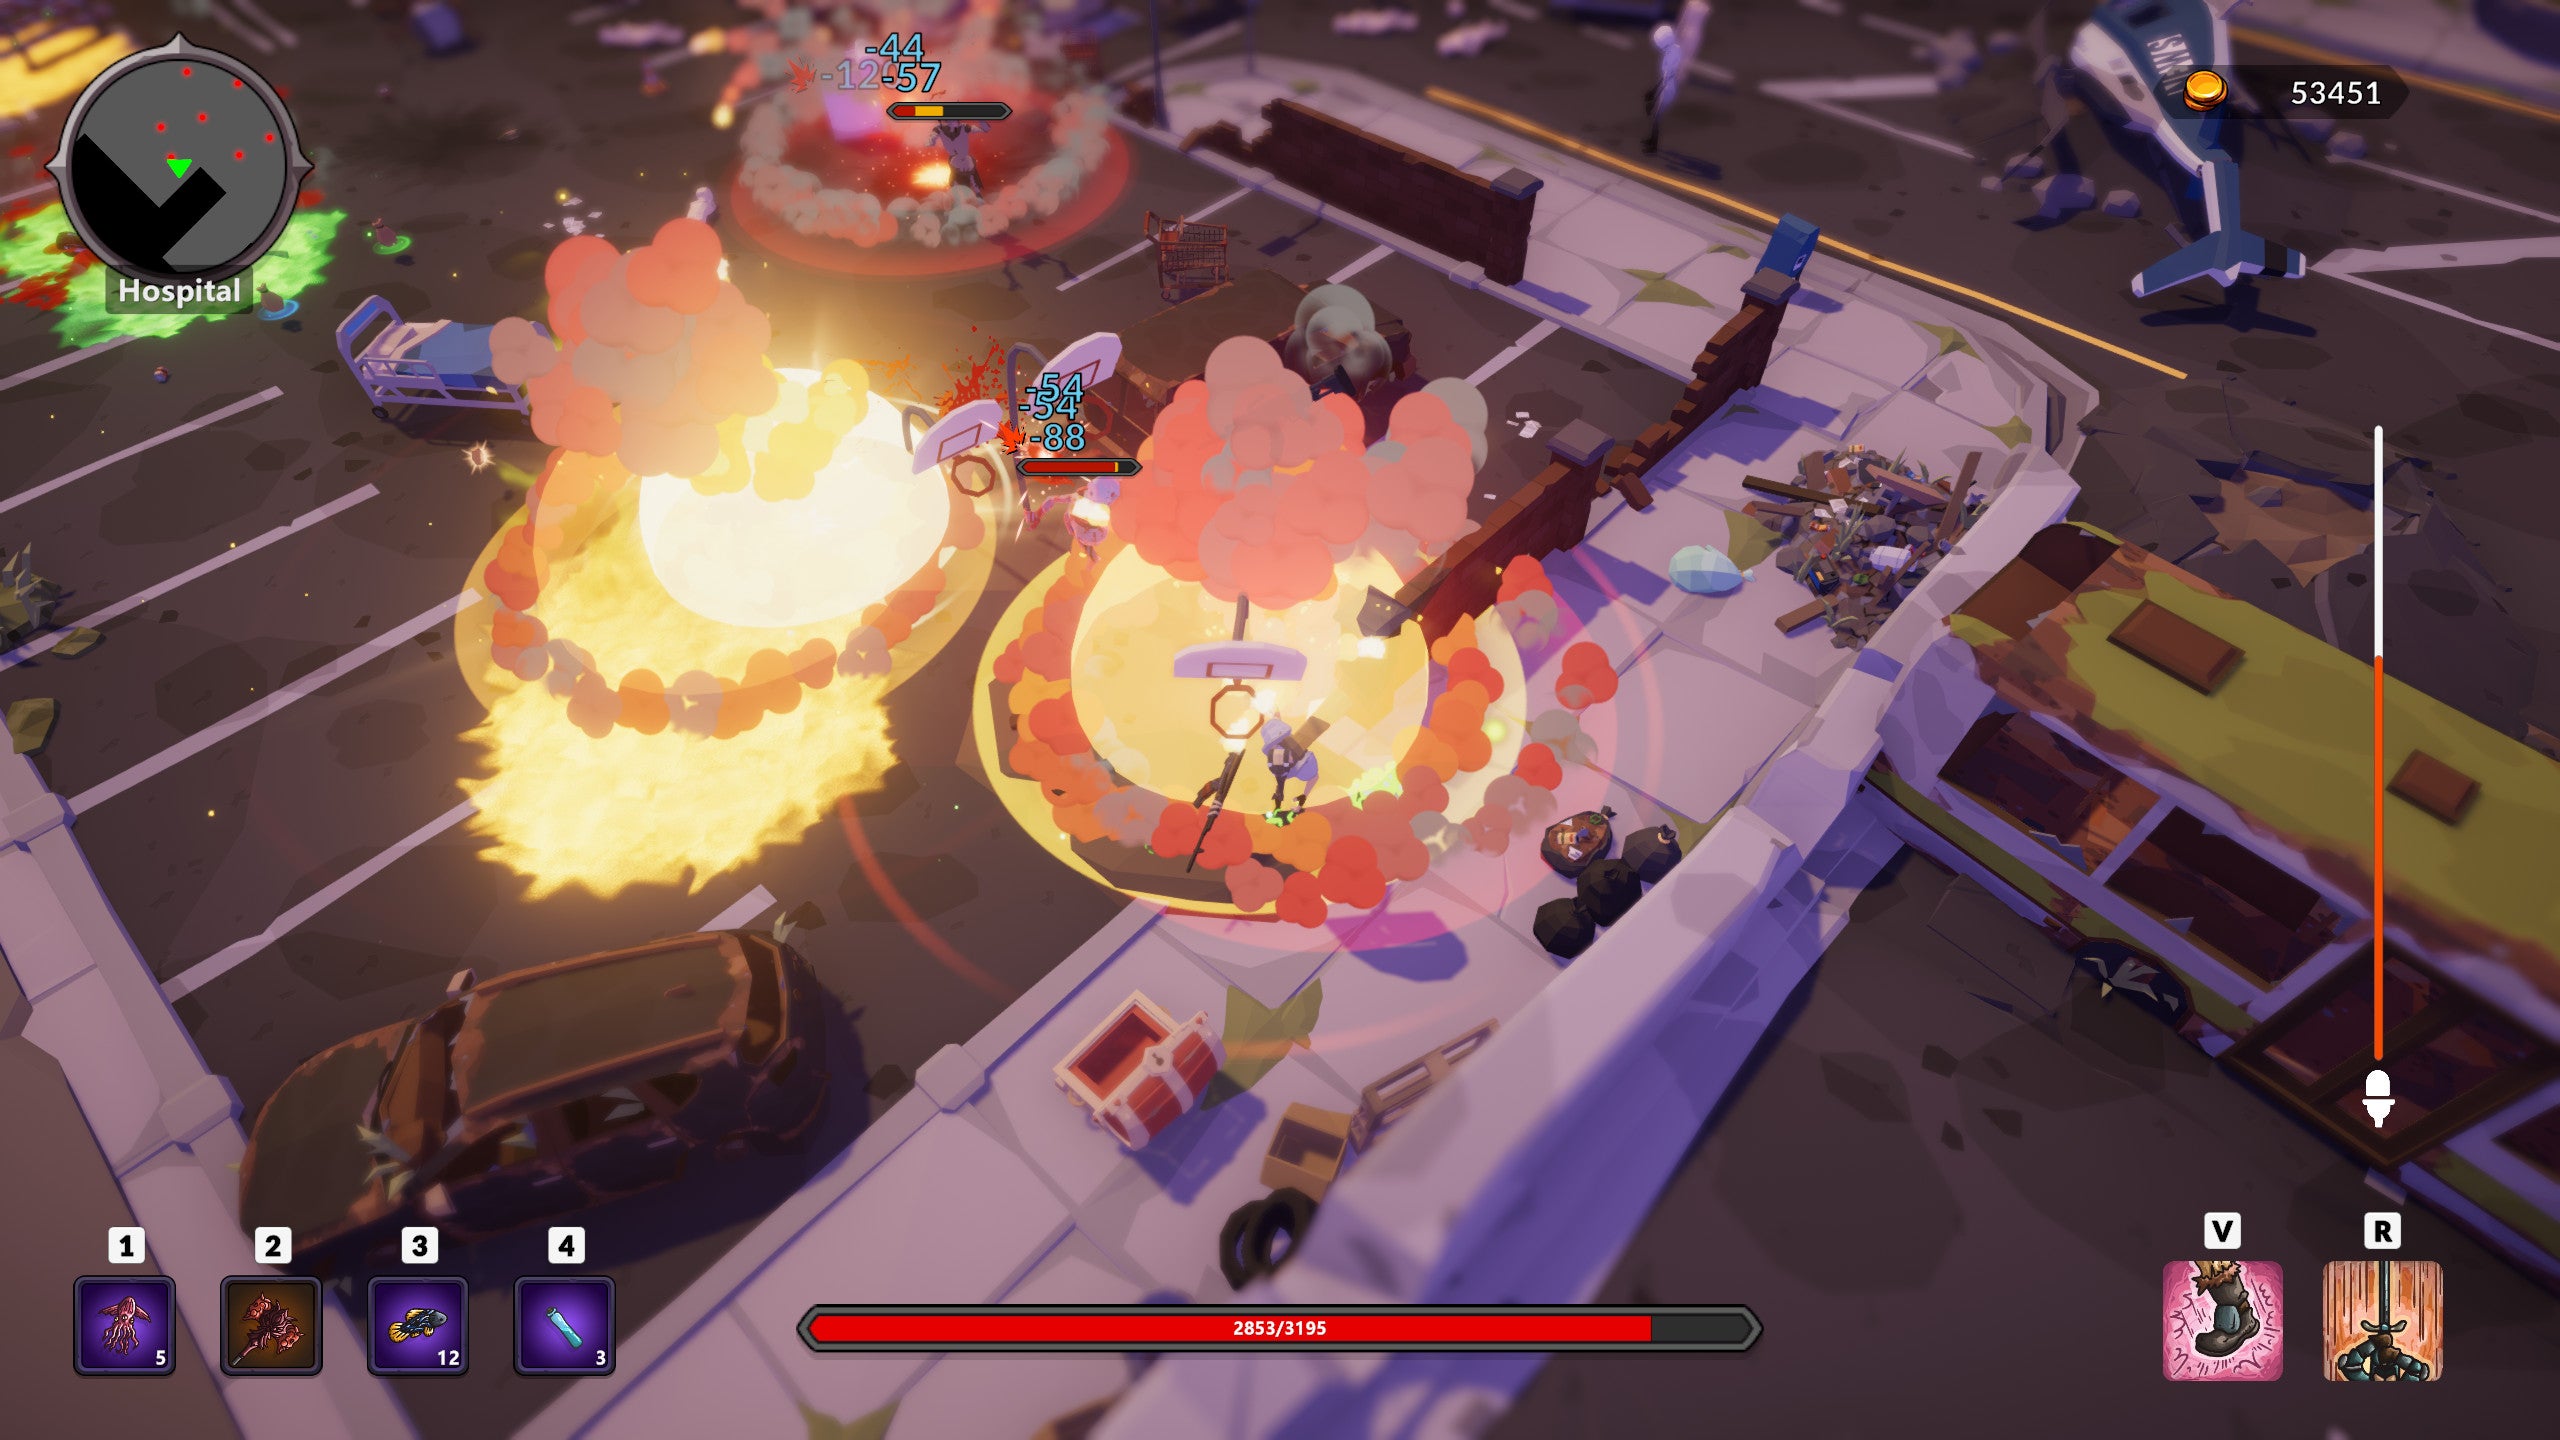 Raining explosions on zombies in a Weird RPG screenshot.